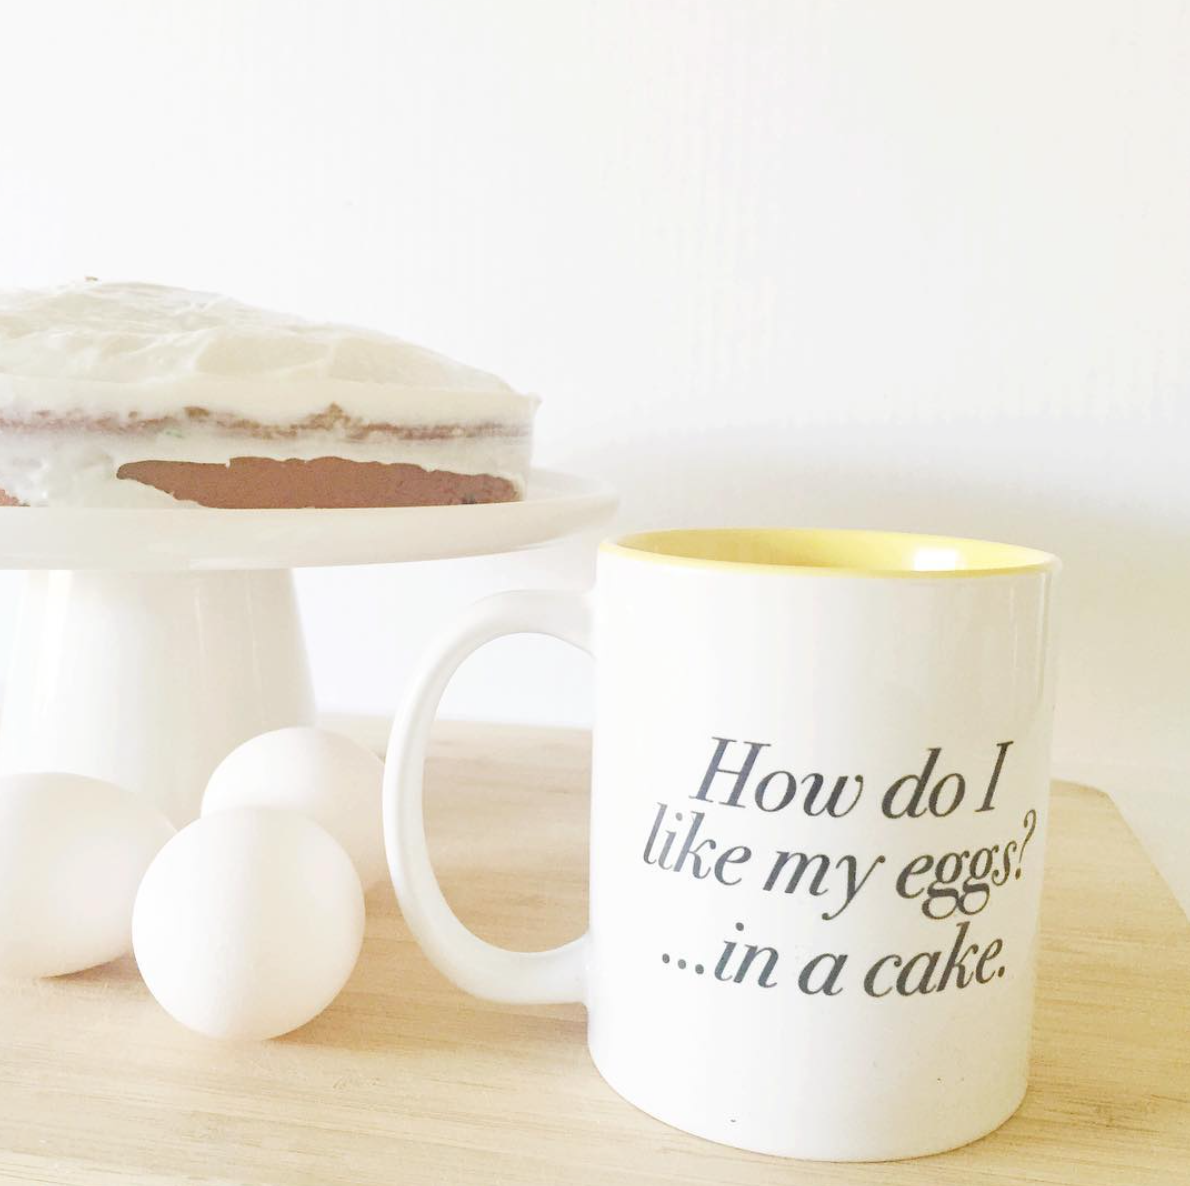 Image result for how do i like my eggs in a cake